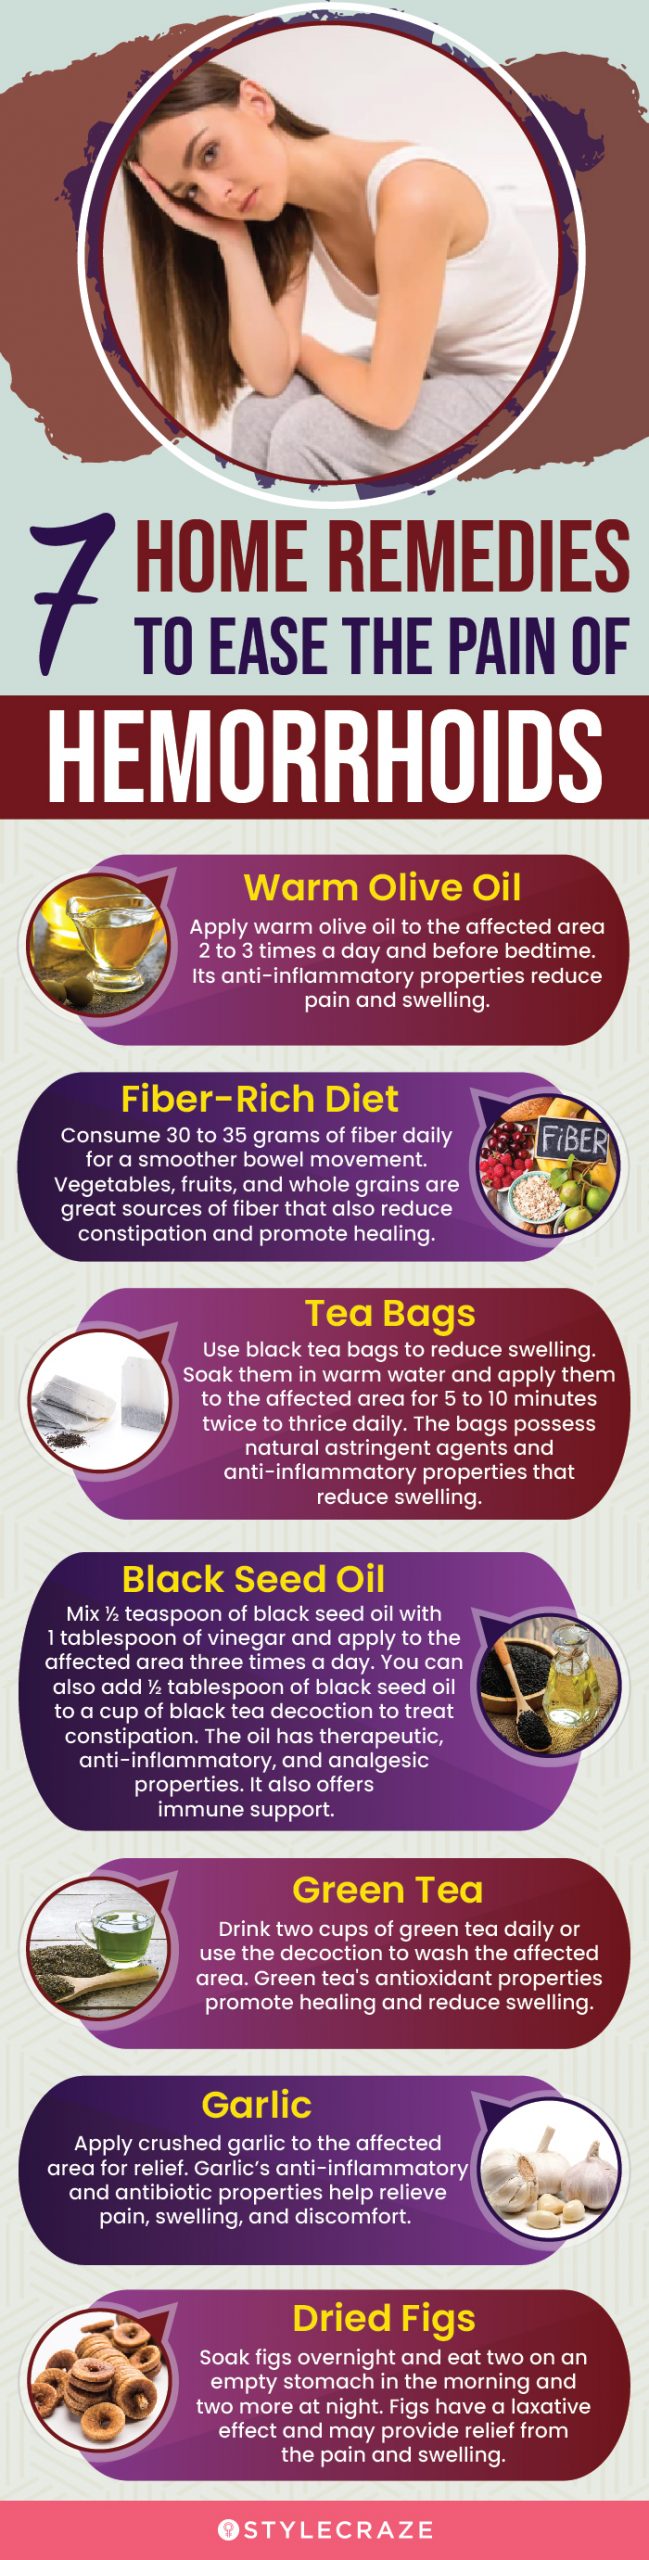 7 home remedies to ease the pain of hemorrhoids (infographic)